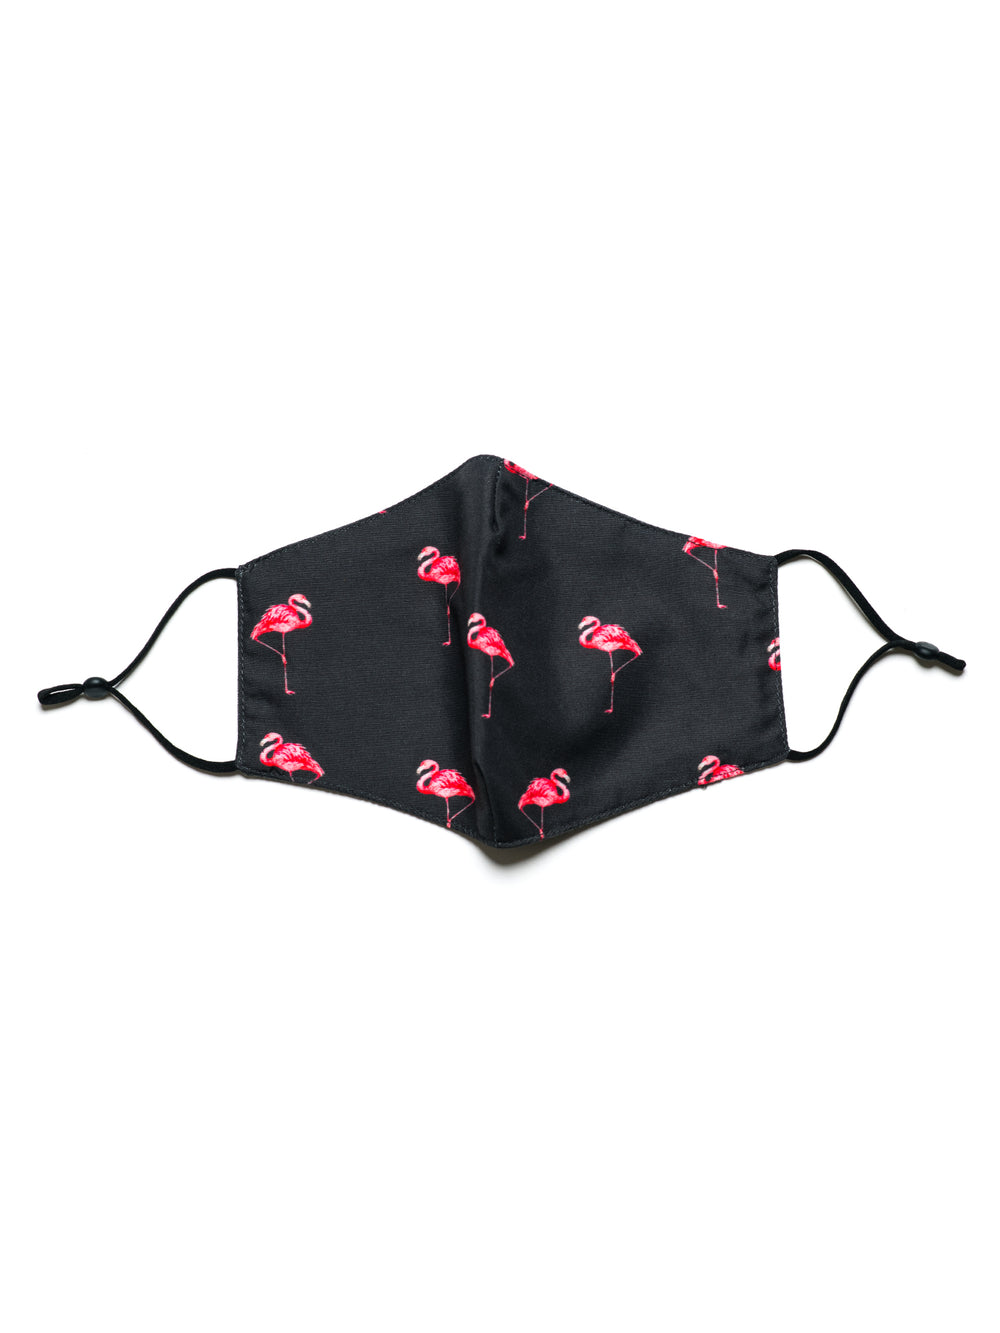 SCOUT & TRAIL FACE MASK - FLAMINGOS - CLEARANCE